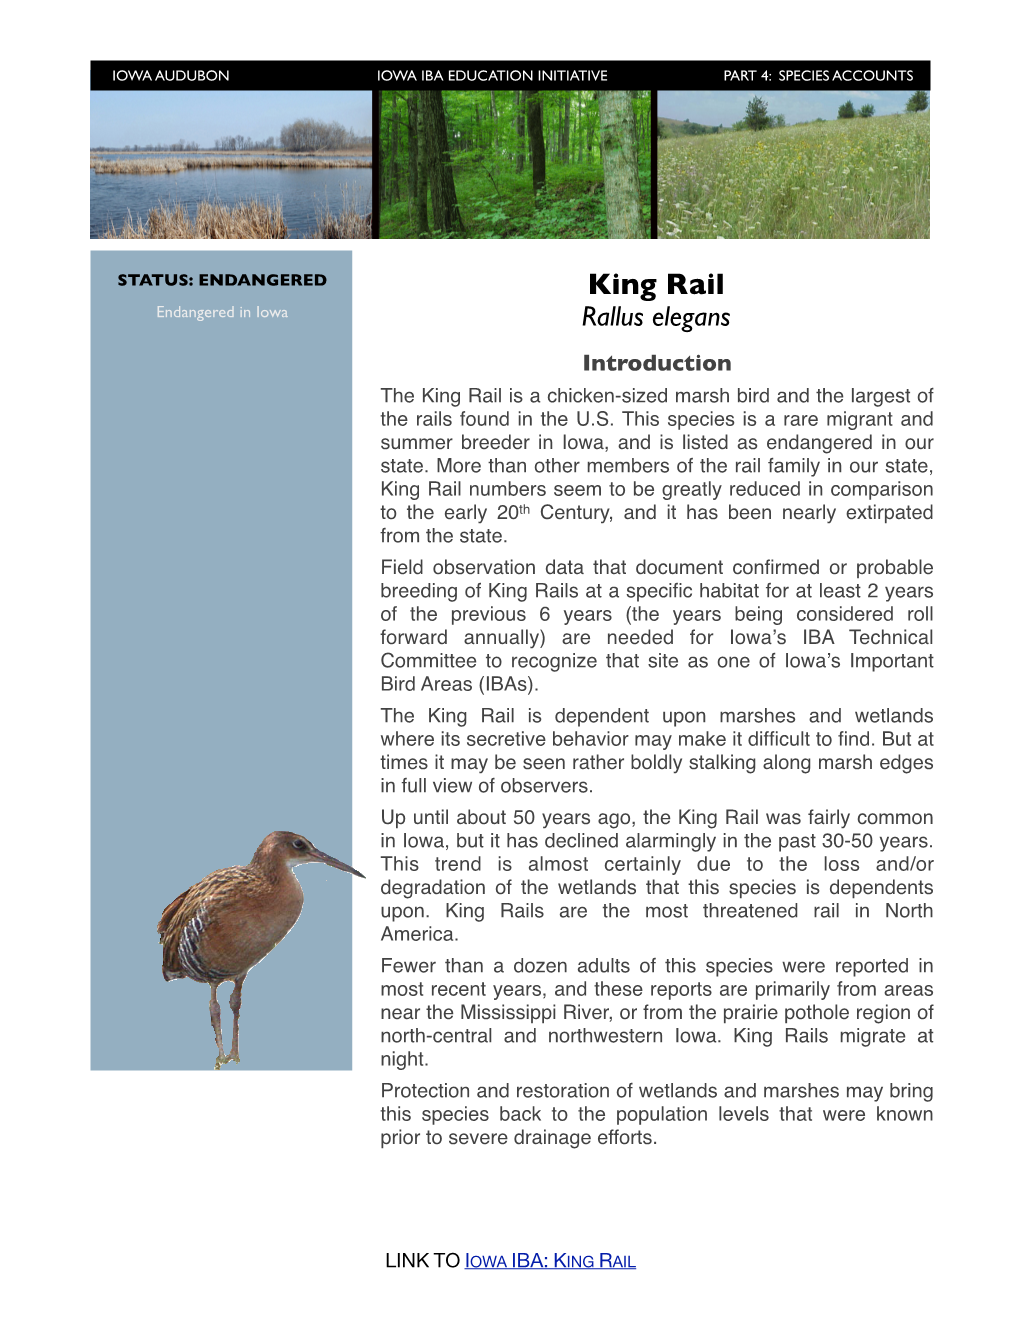 King Rail Endangered in Iowa Rallus Elegans Introduction the King Rail Is a Chicken-Sized Marsh Bird and the Largest of the Rails Found in the U.S